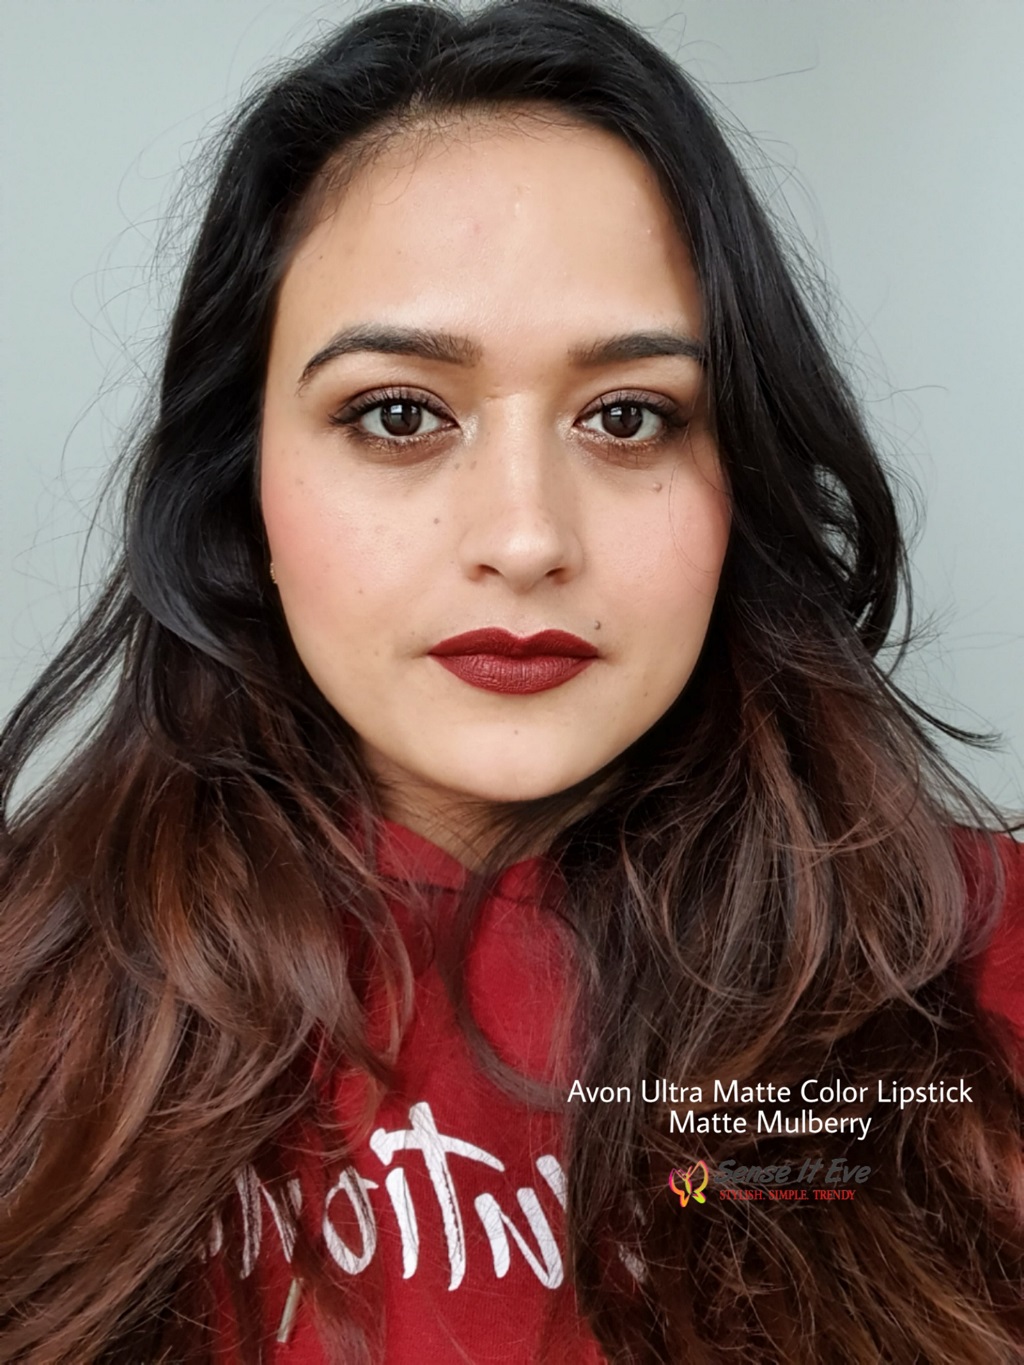 Avon Ultra Color Matte Lipstick Matte Mulberry Swatch Sense It Eve Avon Ultra Color Matte Lipsticks : Review & Swatches